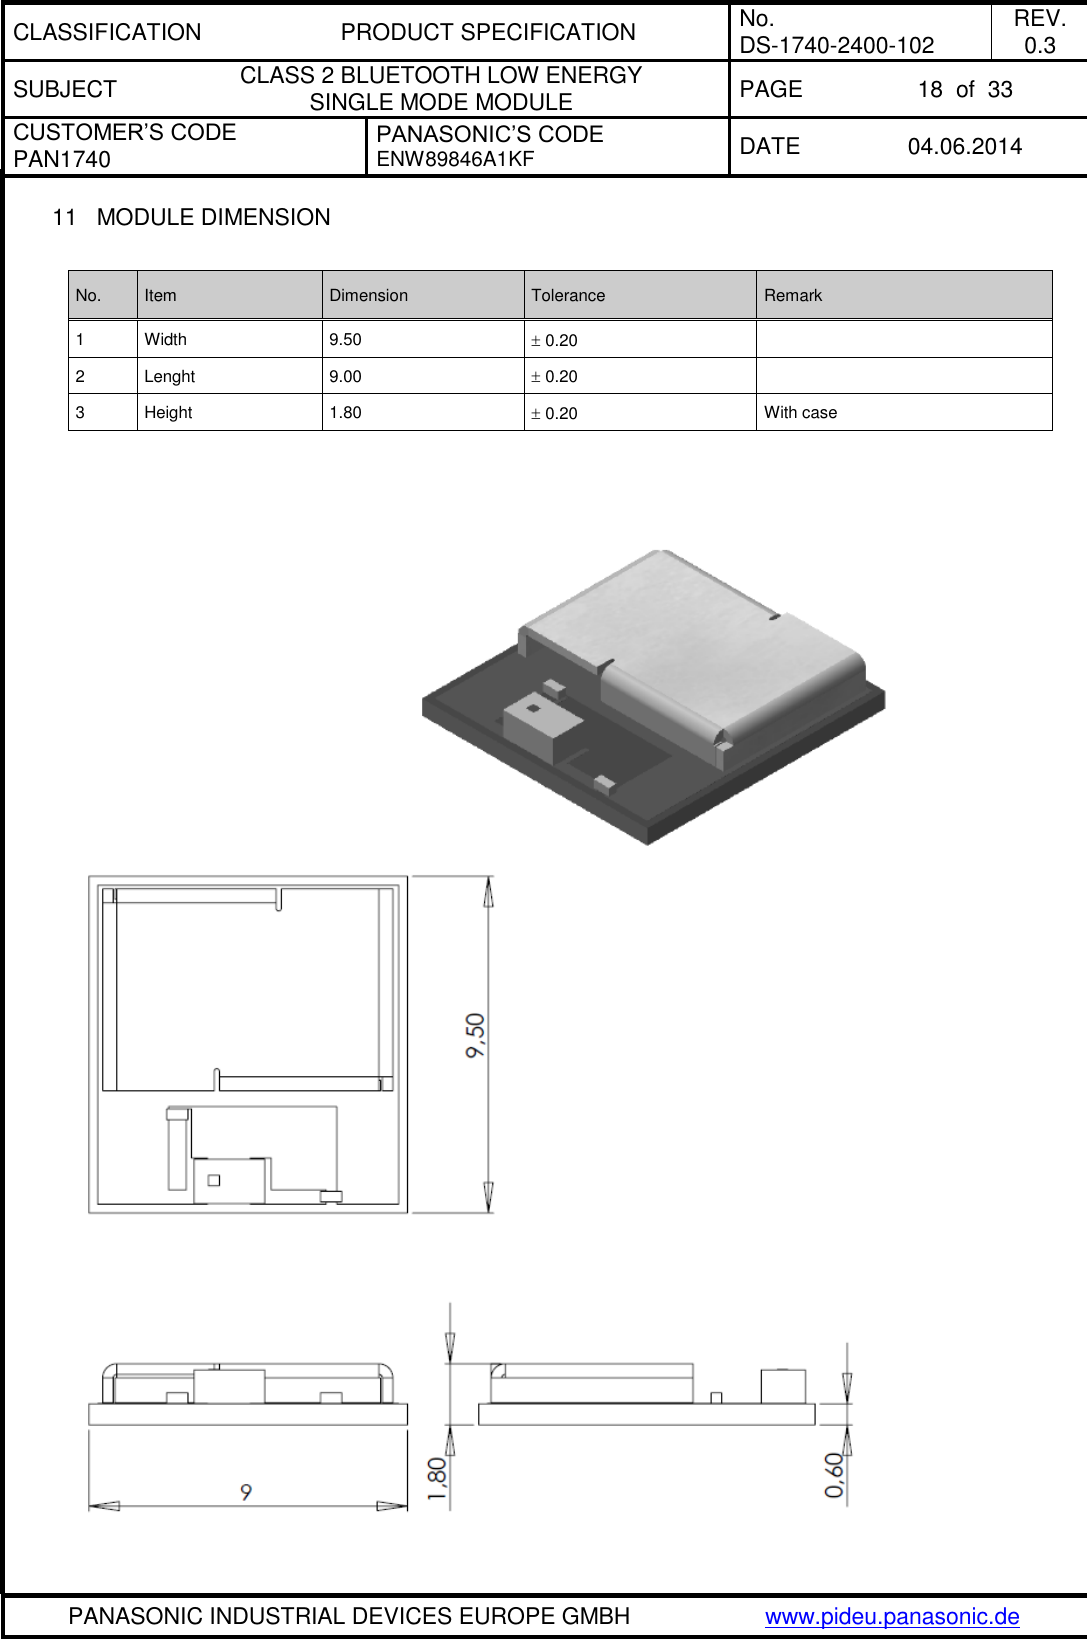 CLASSIFICATION PRODUCT SPECIFICATION No. DS-1740-2400-102 REV. 0.3 SUBJECT CLASS 2 BLUETOOTH LOW ENERGY  SINGLE MODE MODULE PAGE 18  of  33 CUSTOMER’S CODE PAN1740 PANASONIC’S CODE ENW89846A1KF DATE 04.06.2014   PANASONIC INDUSTRIAL DEVICES EUROPE GMBH www.pideu.panasonic.de  11  MODULE DIMENSION  No. Item Dimension Tolerance Remark 1 Width 9.50  0.20  2 Lenght 9.00  0.20  3 Height 1.80  0.20 With case     